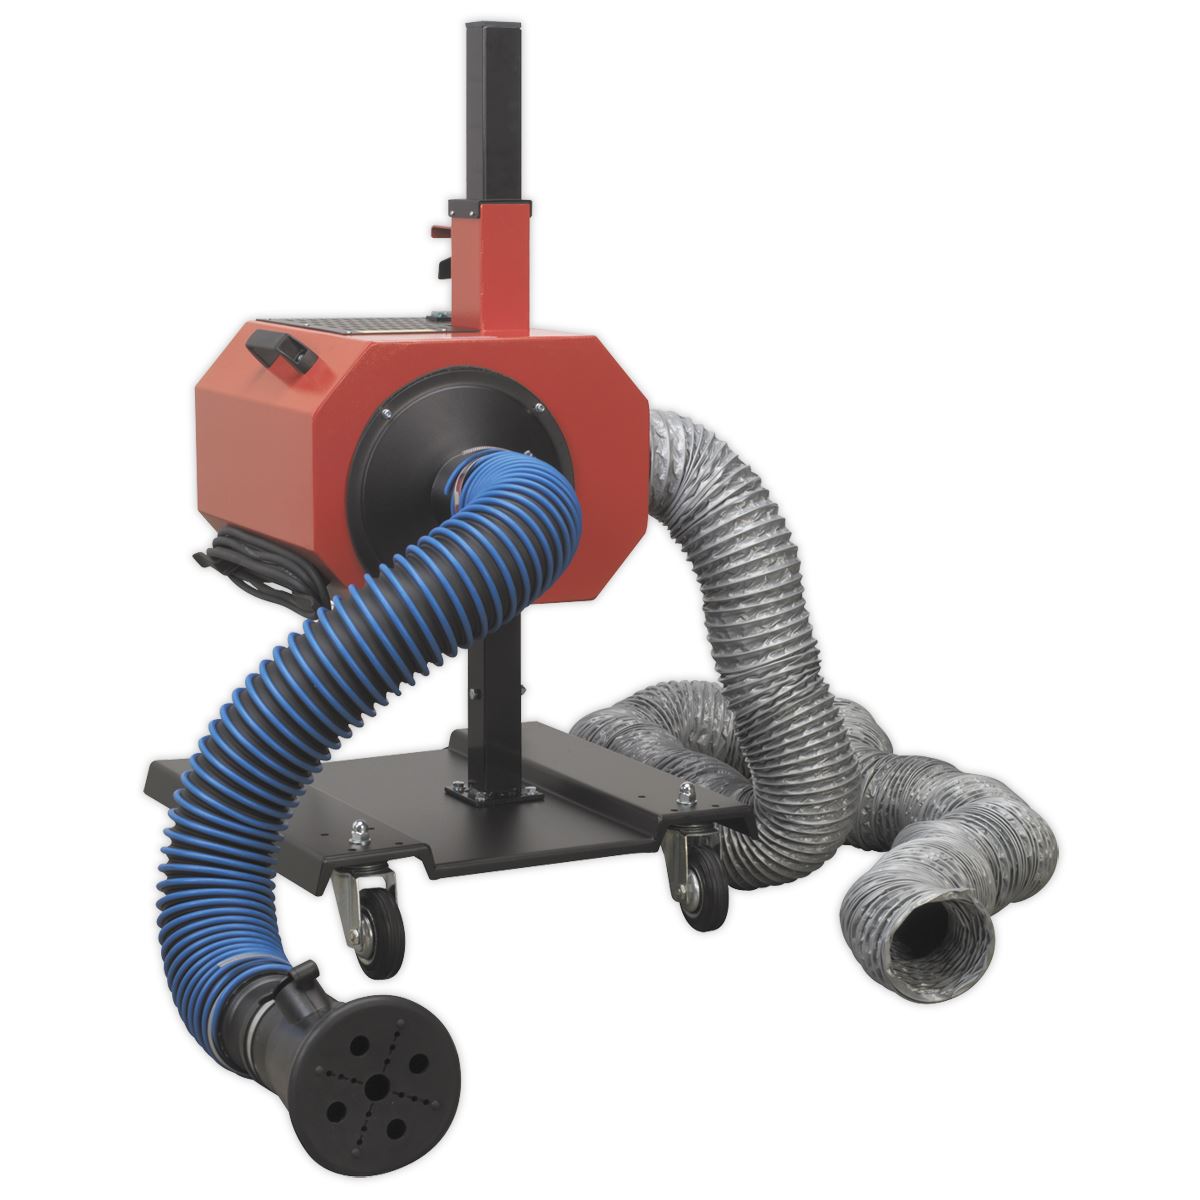 Sealey Exhaust Fume Extractor with 6m Ducting